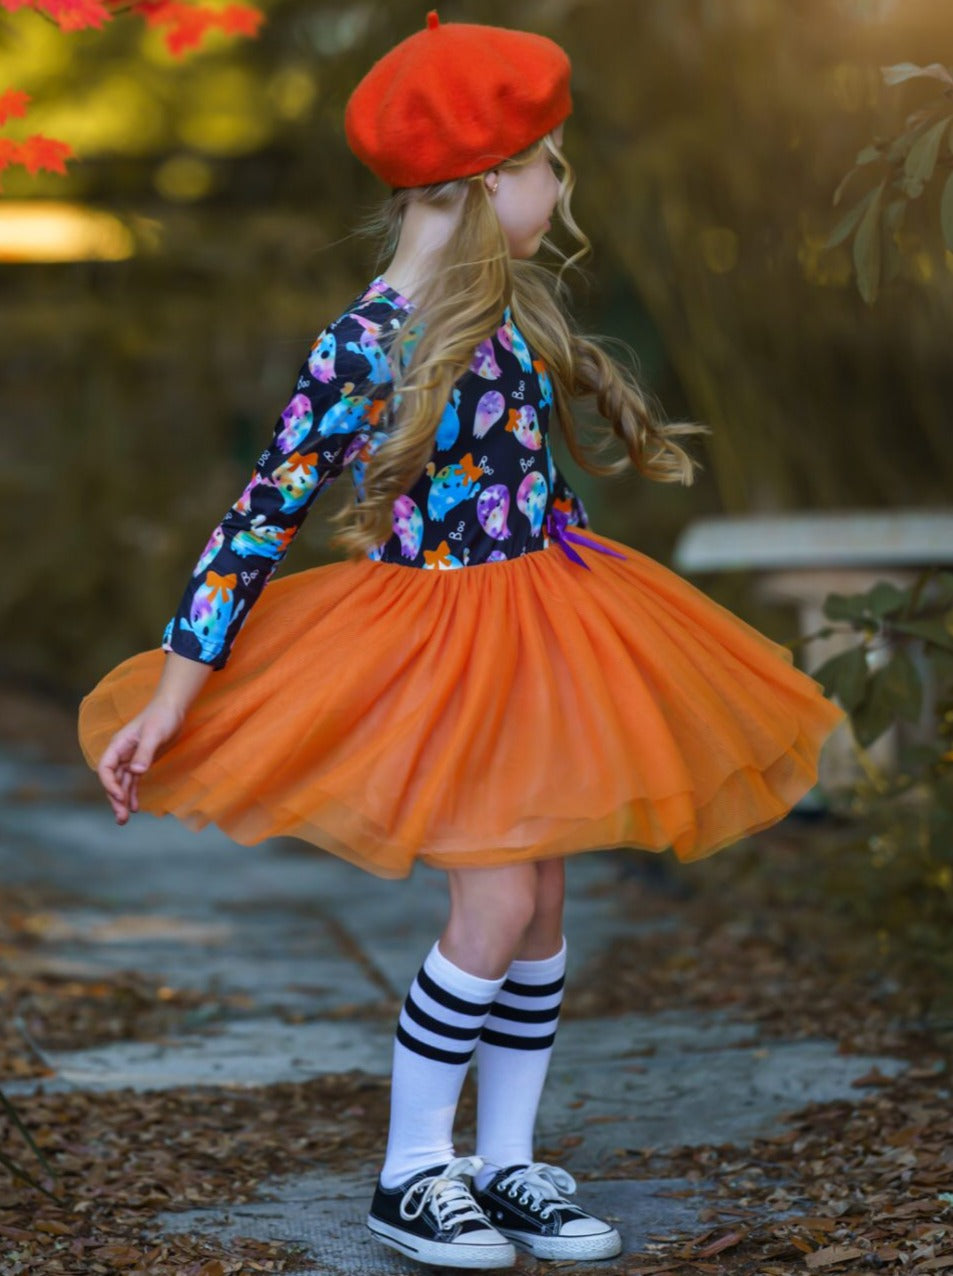 Girls long-sleeve tutu dress with tie-dye ghost print bodice, gathered tulle skirt, and embellished with a ribbon bow - Mia Belle Girls